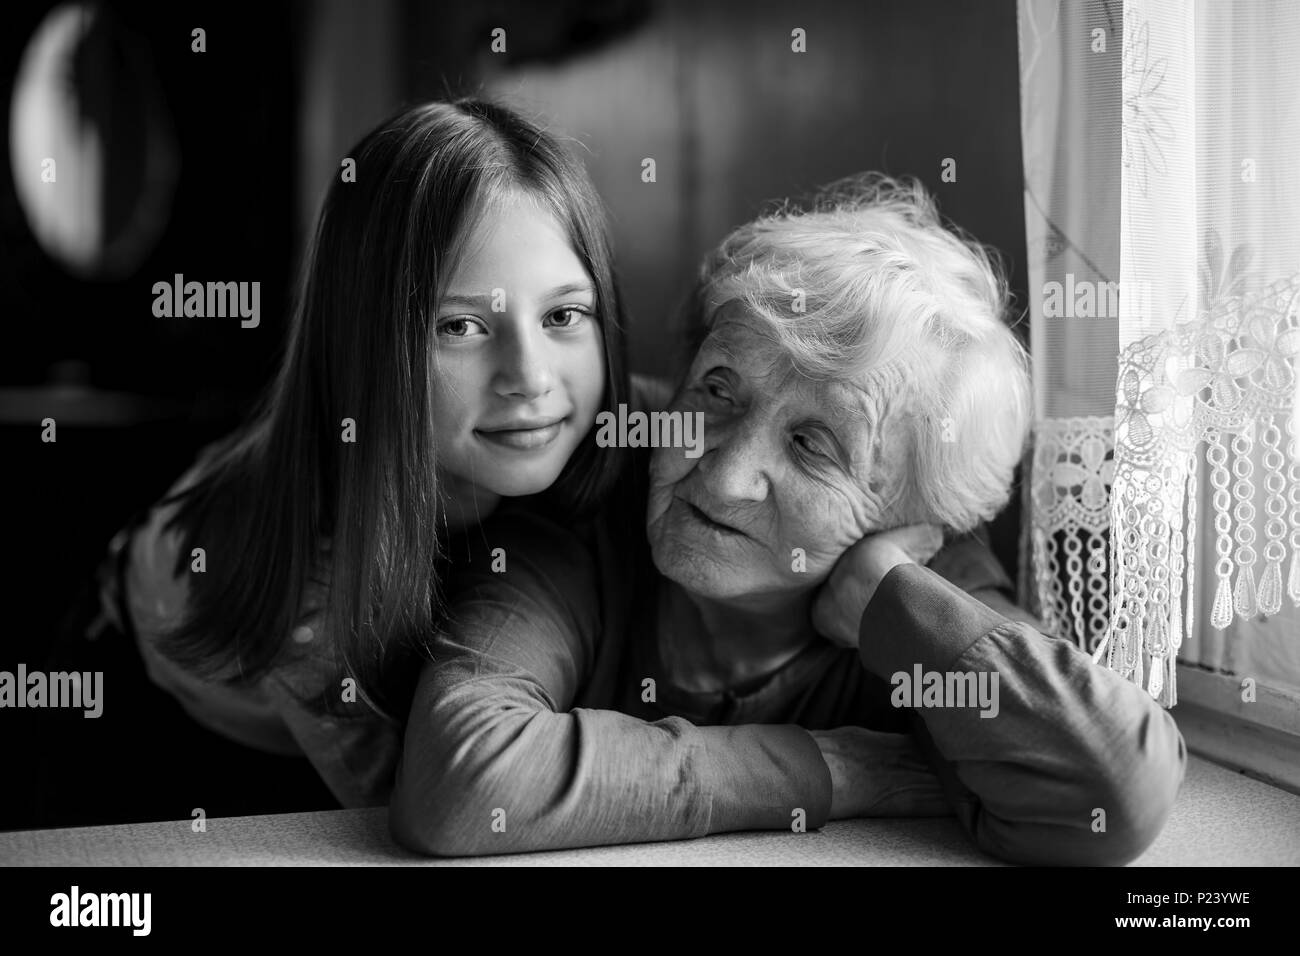 A little girl hugs her grandmother. Black and white portrait. Stock Photo